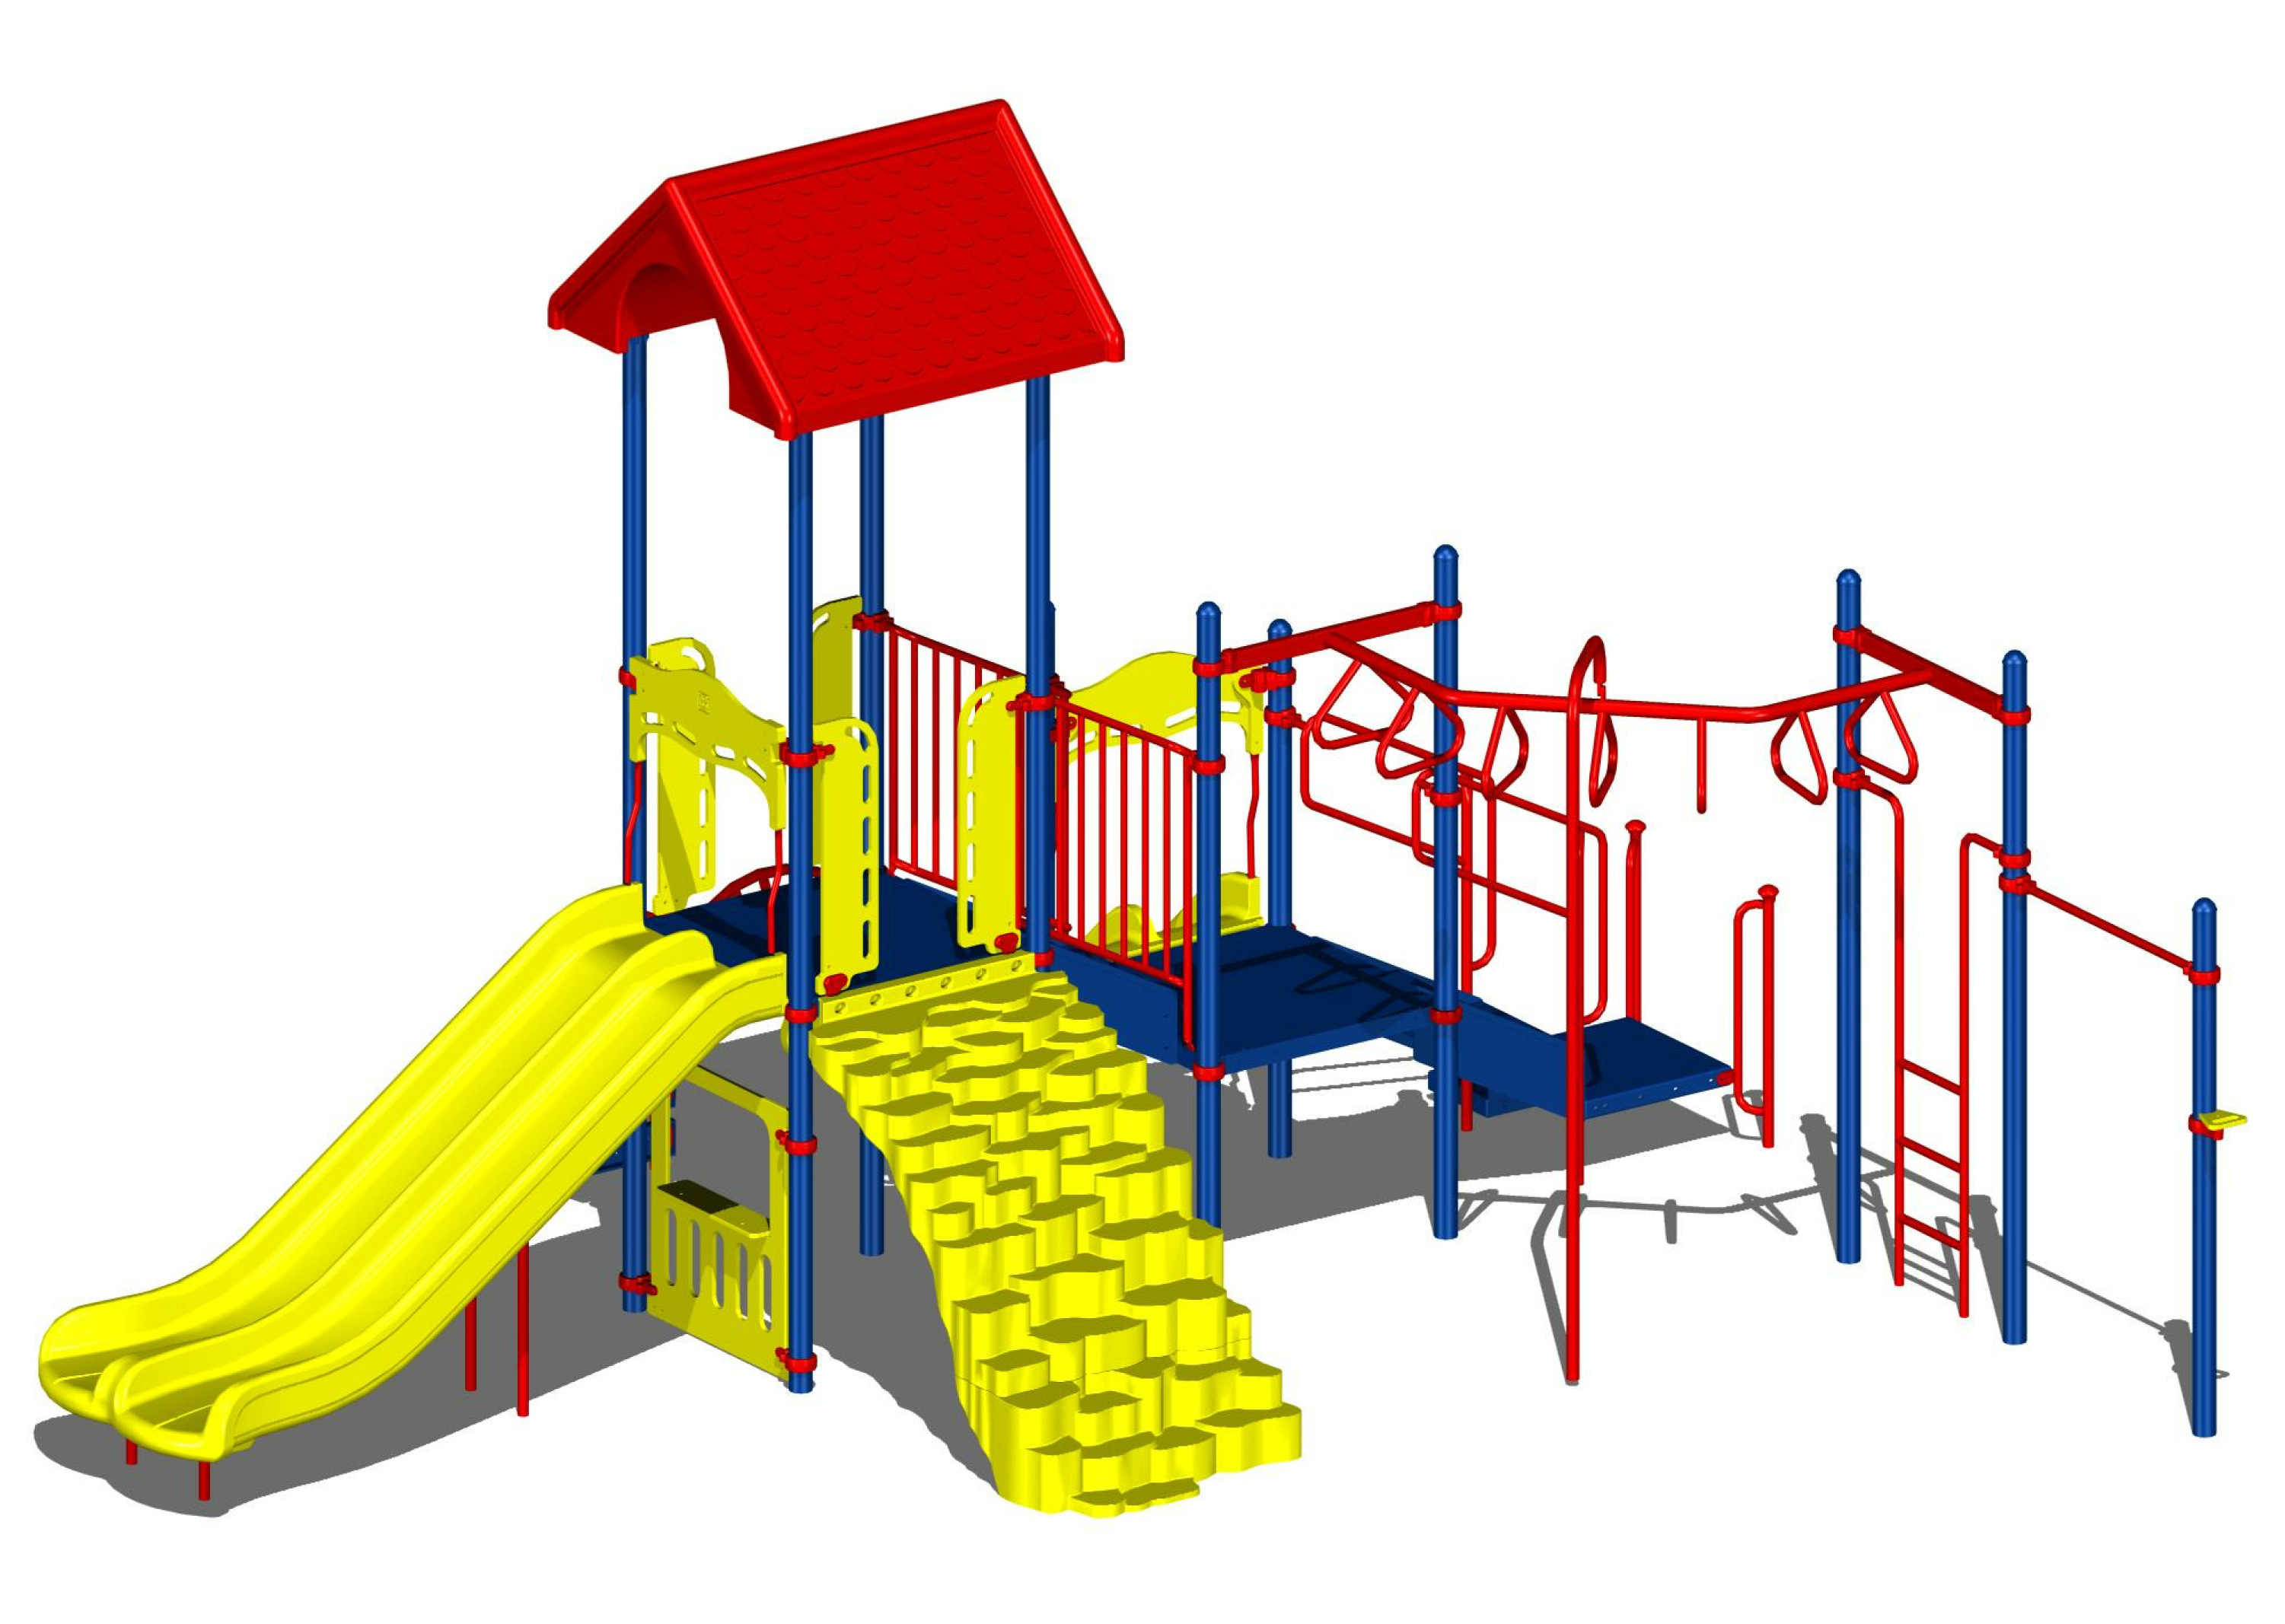 23 Image Of Playground Free Cliparts That You Can Download To You